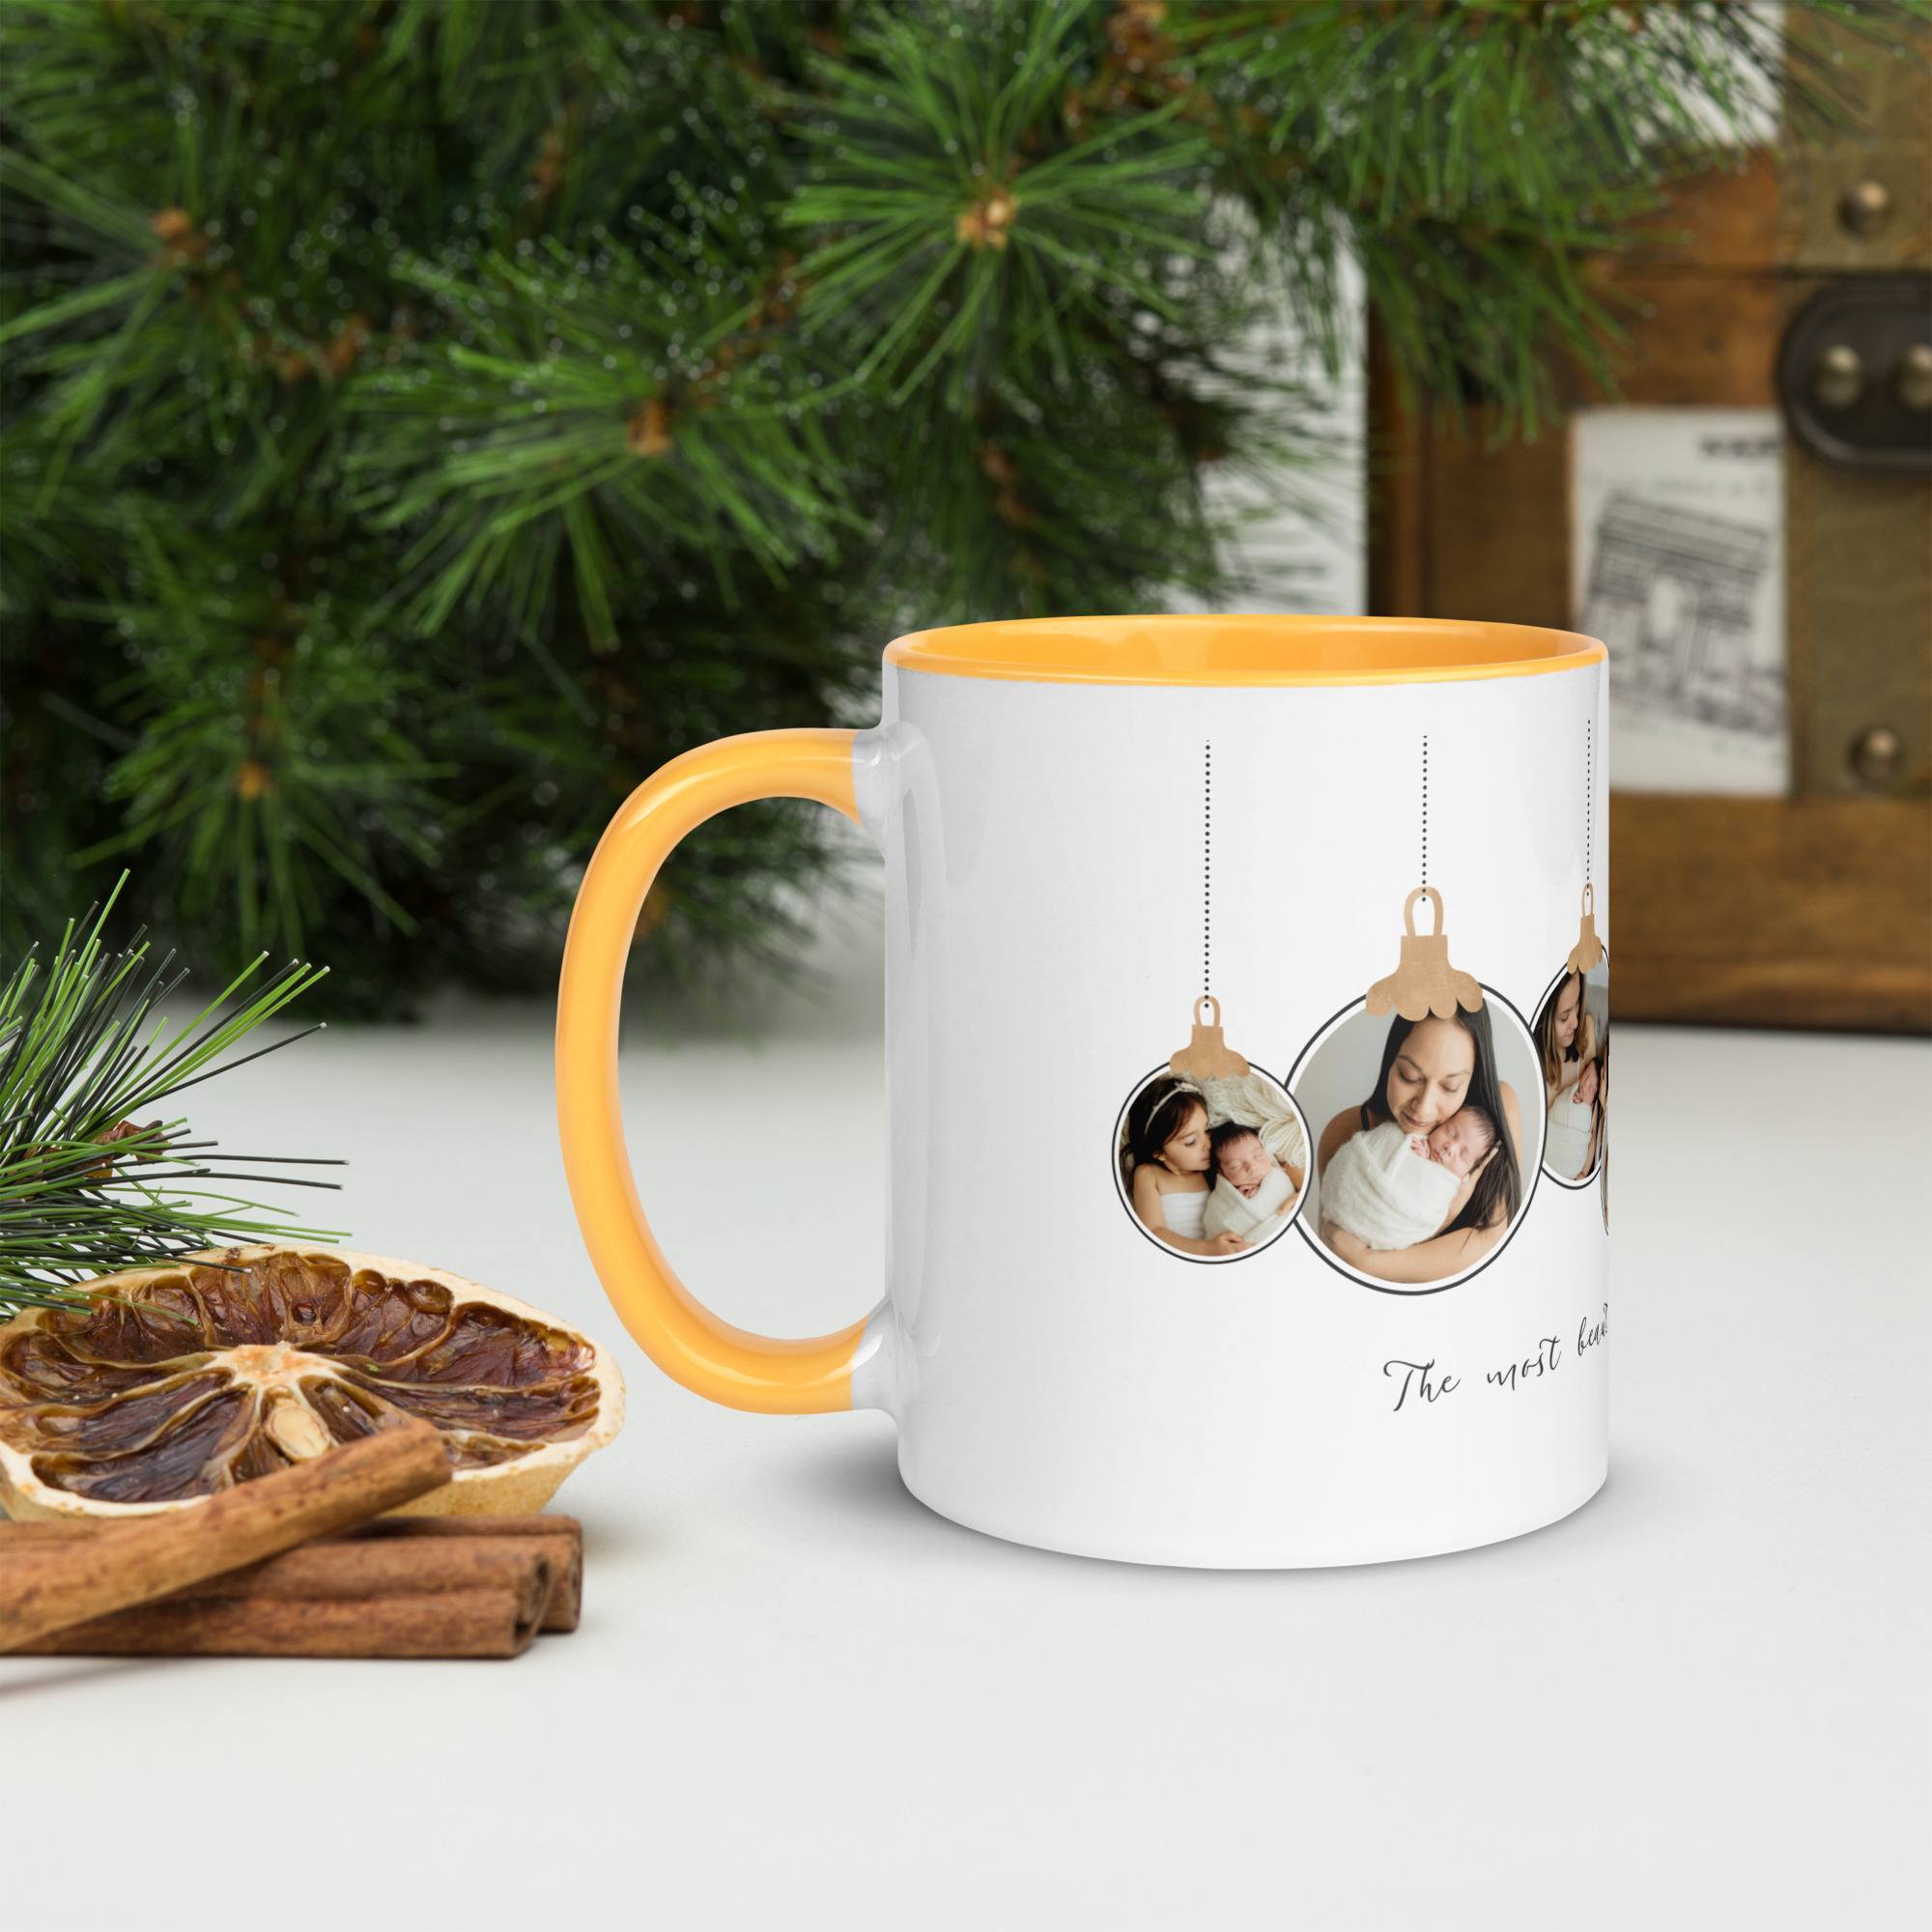 personalized "wrapped in cheer" mug